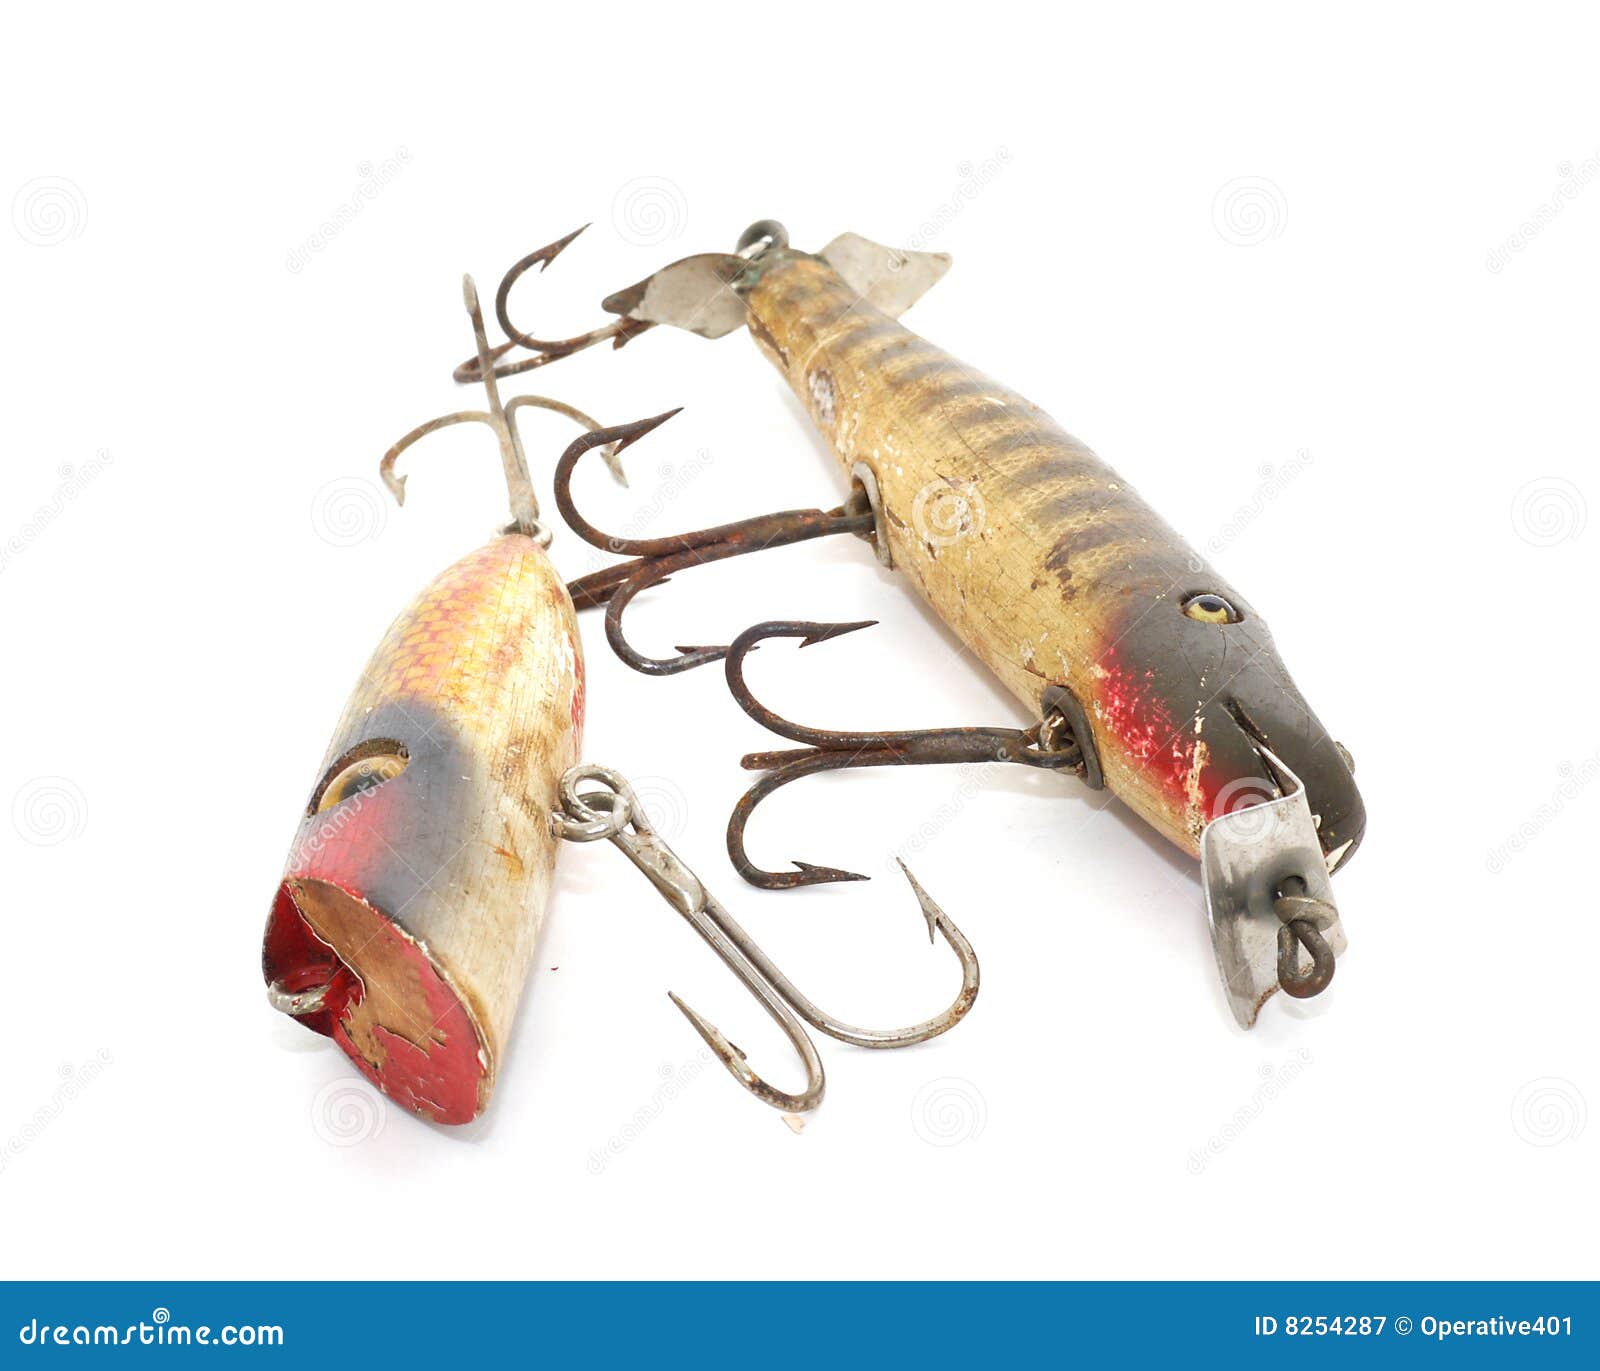 https://thumbs.dreamstime.com/z/antique-fishing-lures-8254287.jpg